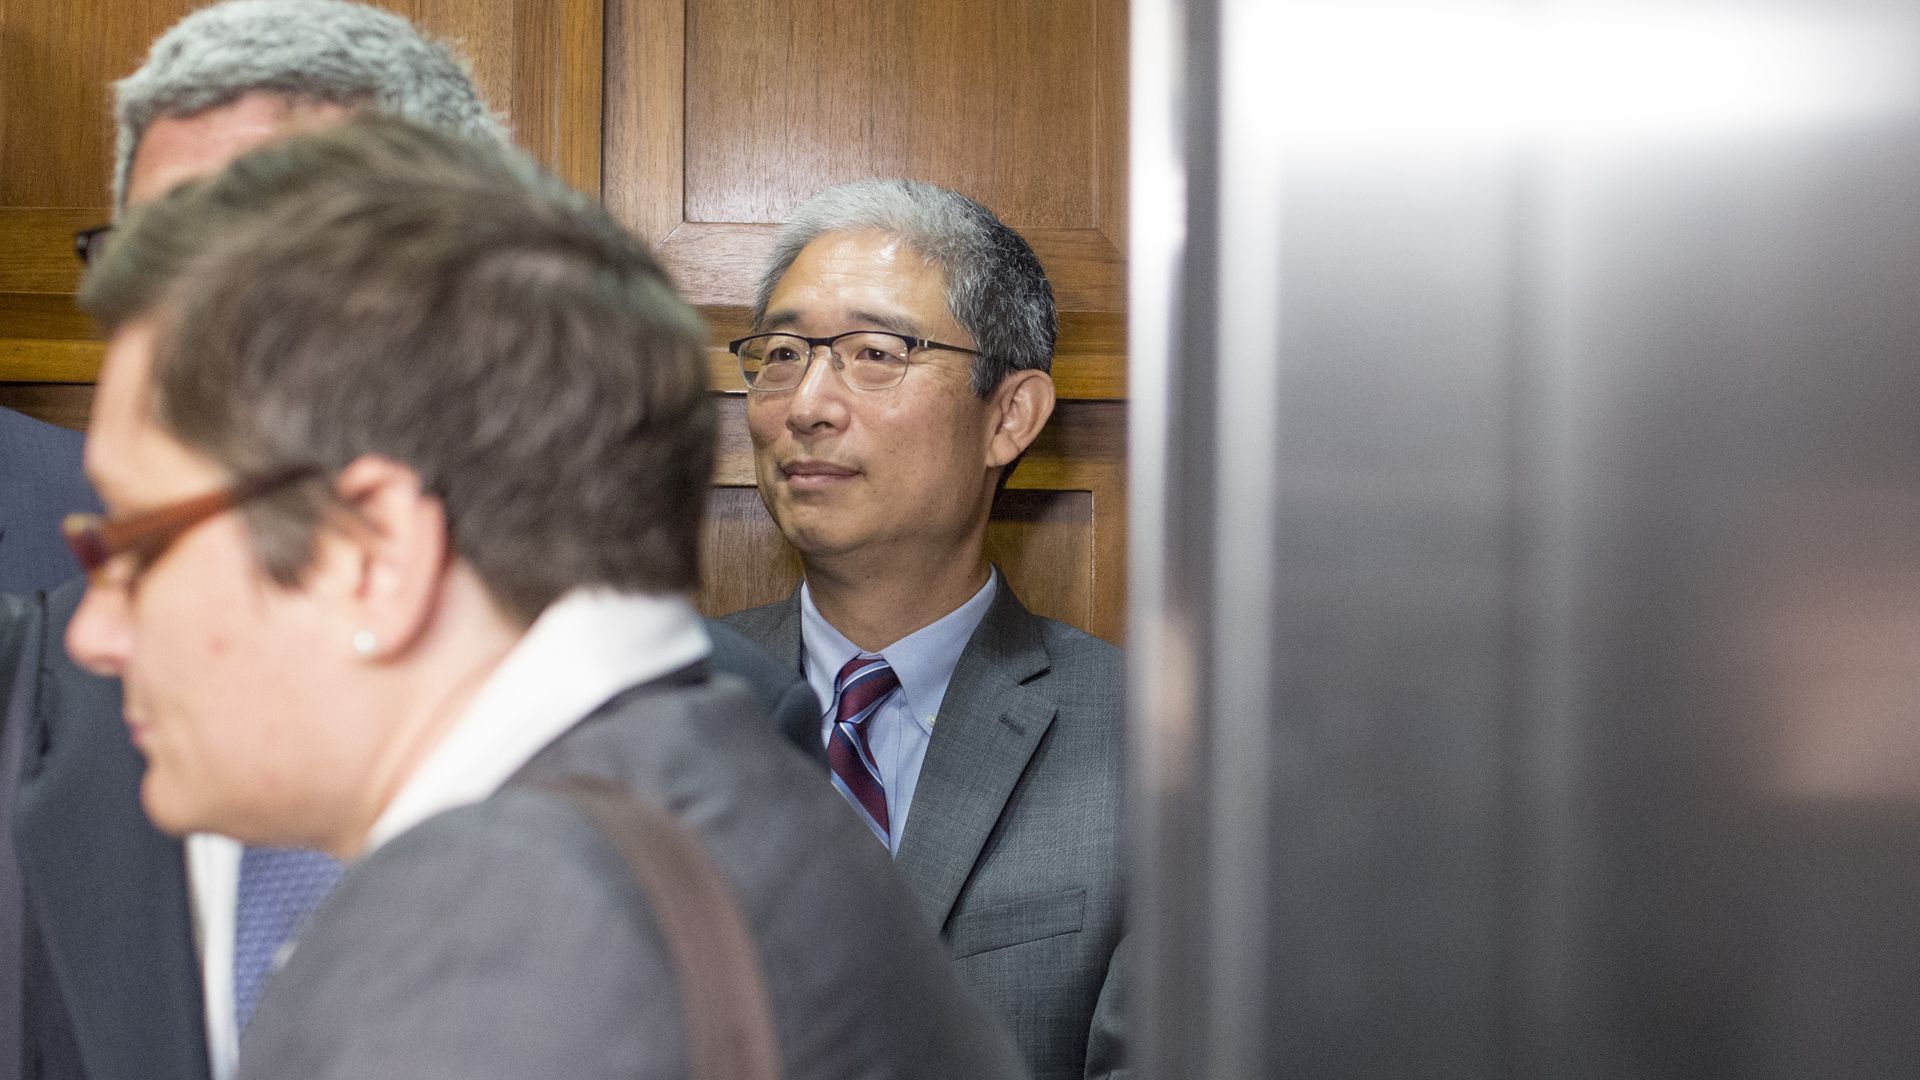 Bruce Ohr standing behind other men.